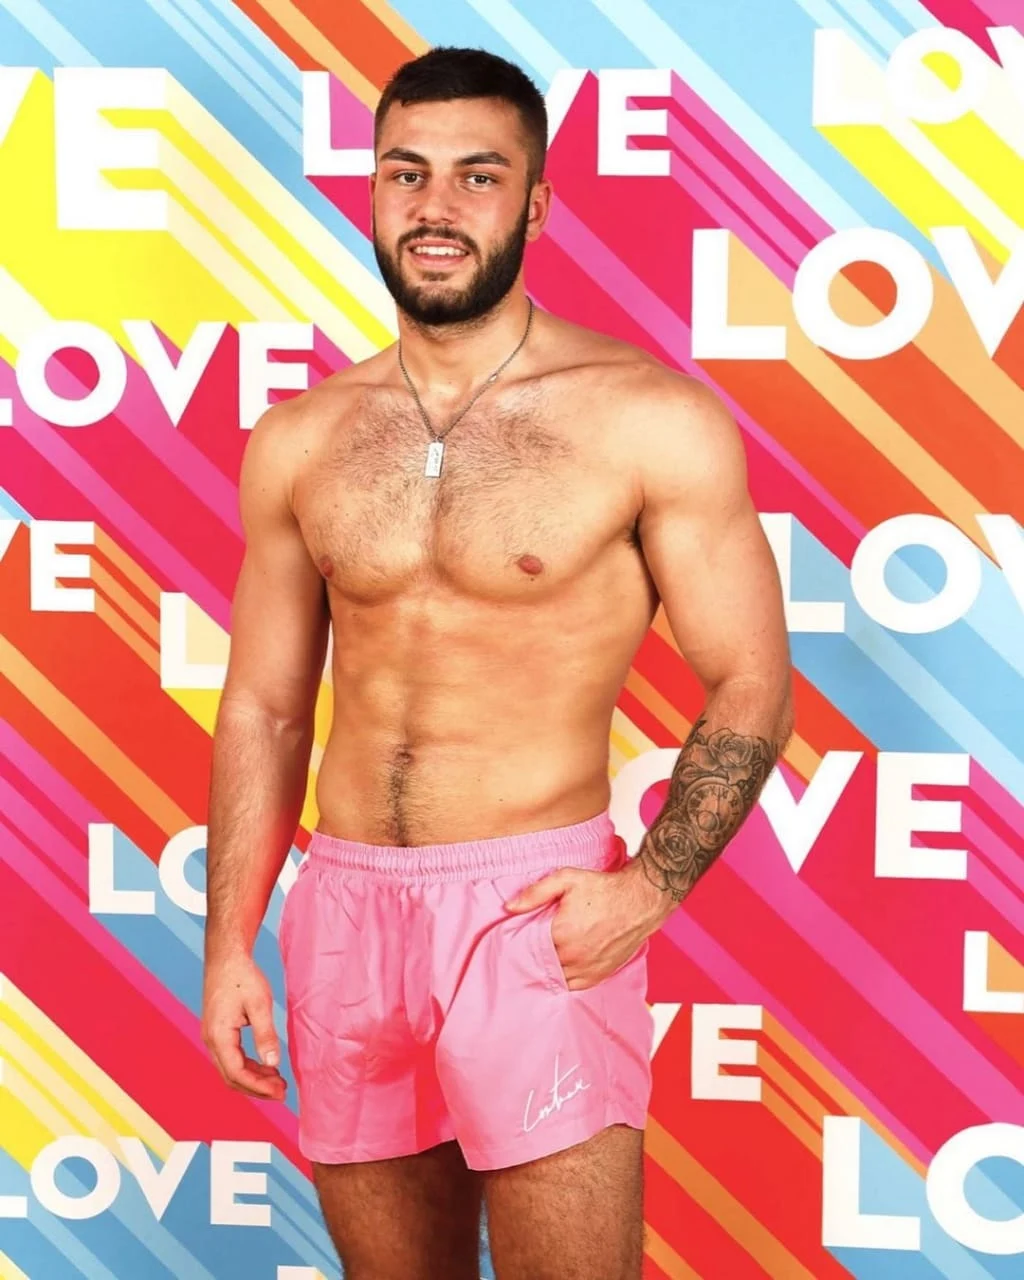 Oxford City defender Finley Tapp is the newest contestant to join reality TV show Love Island